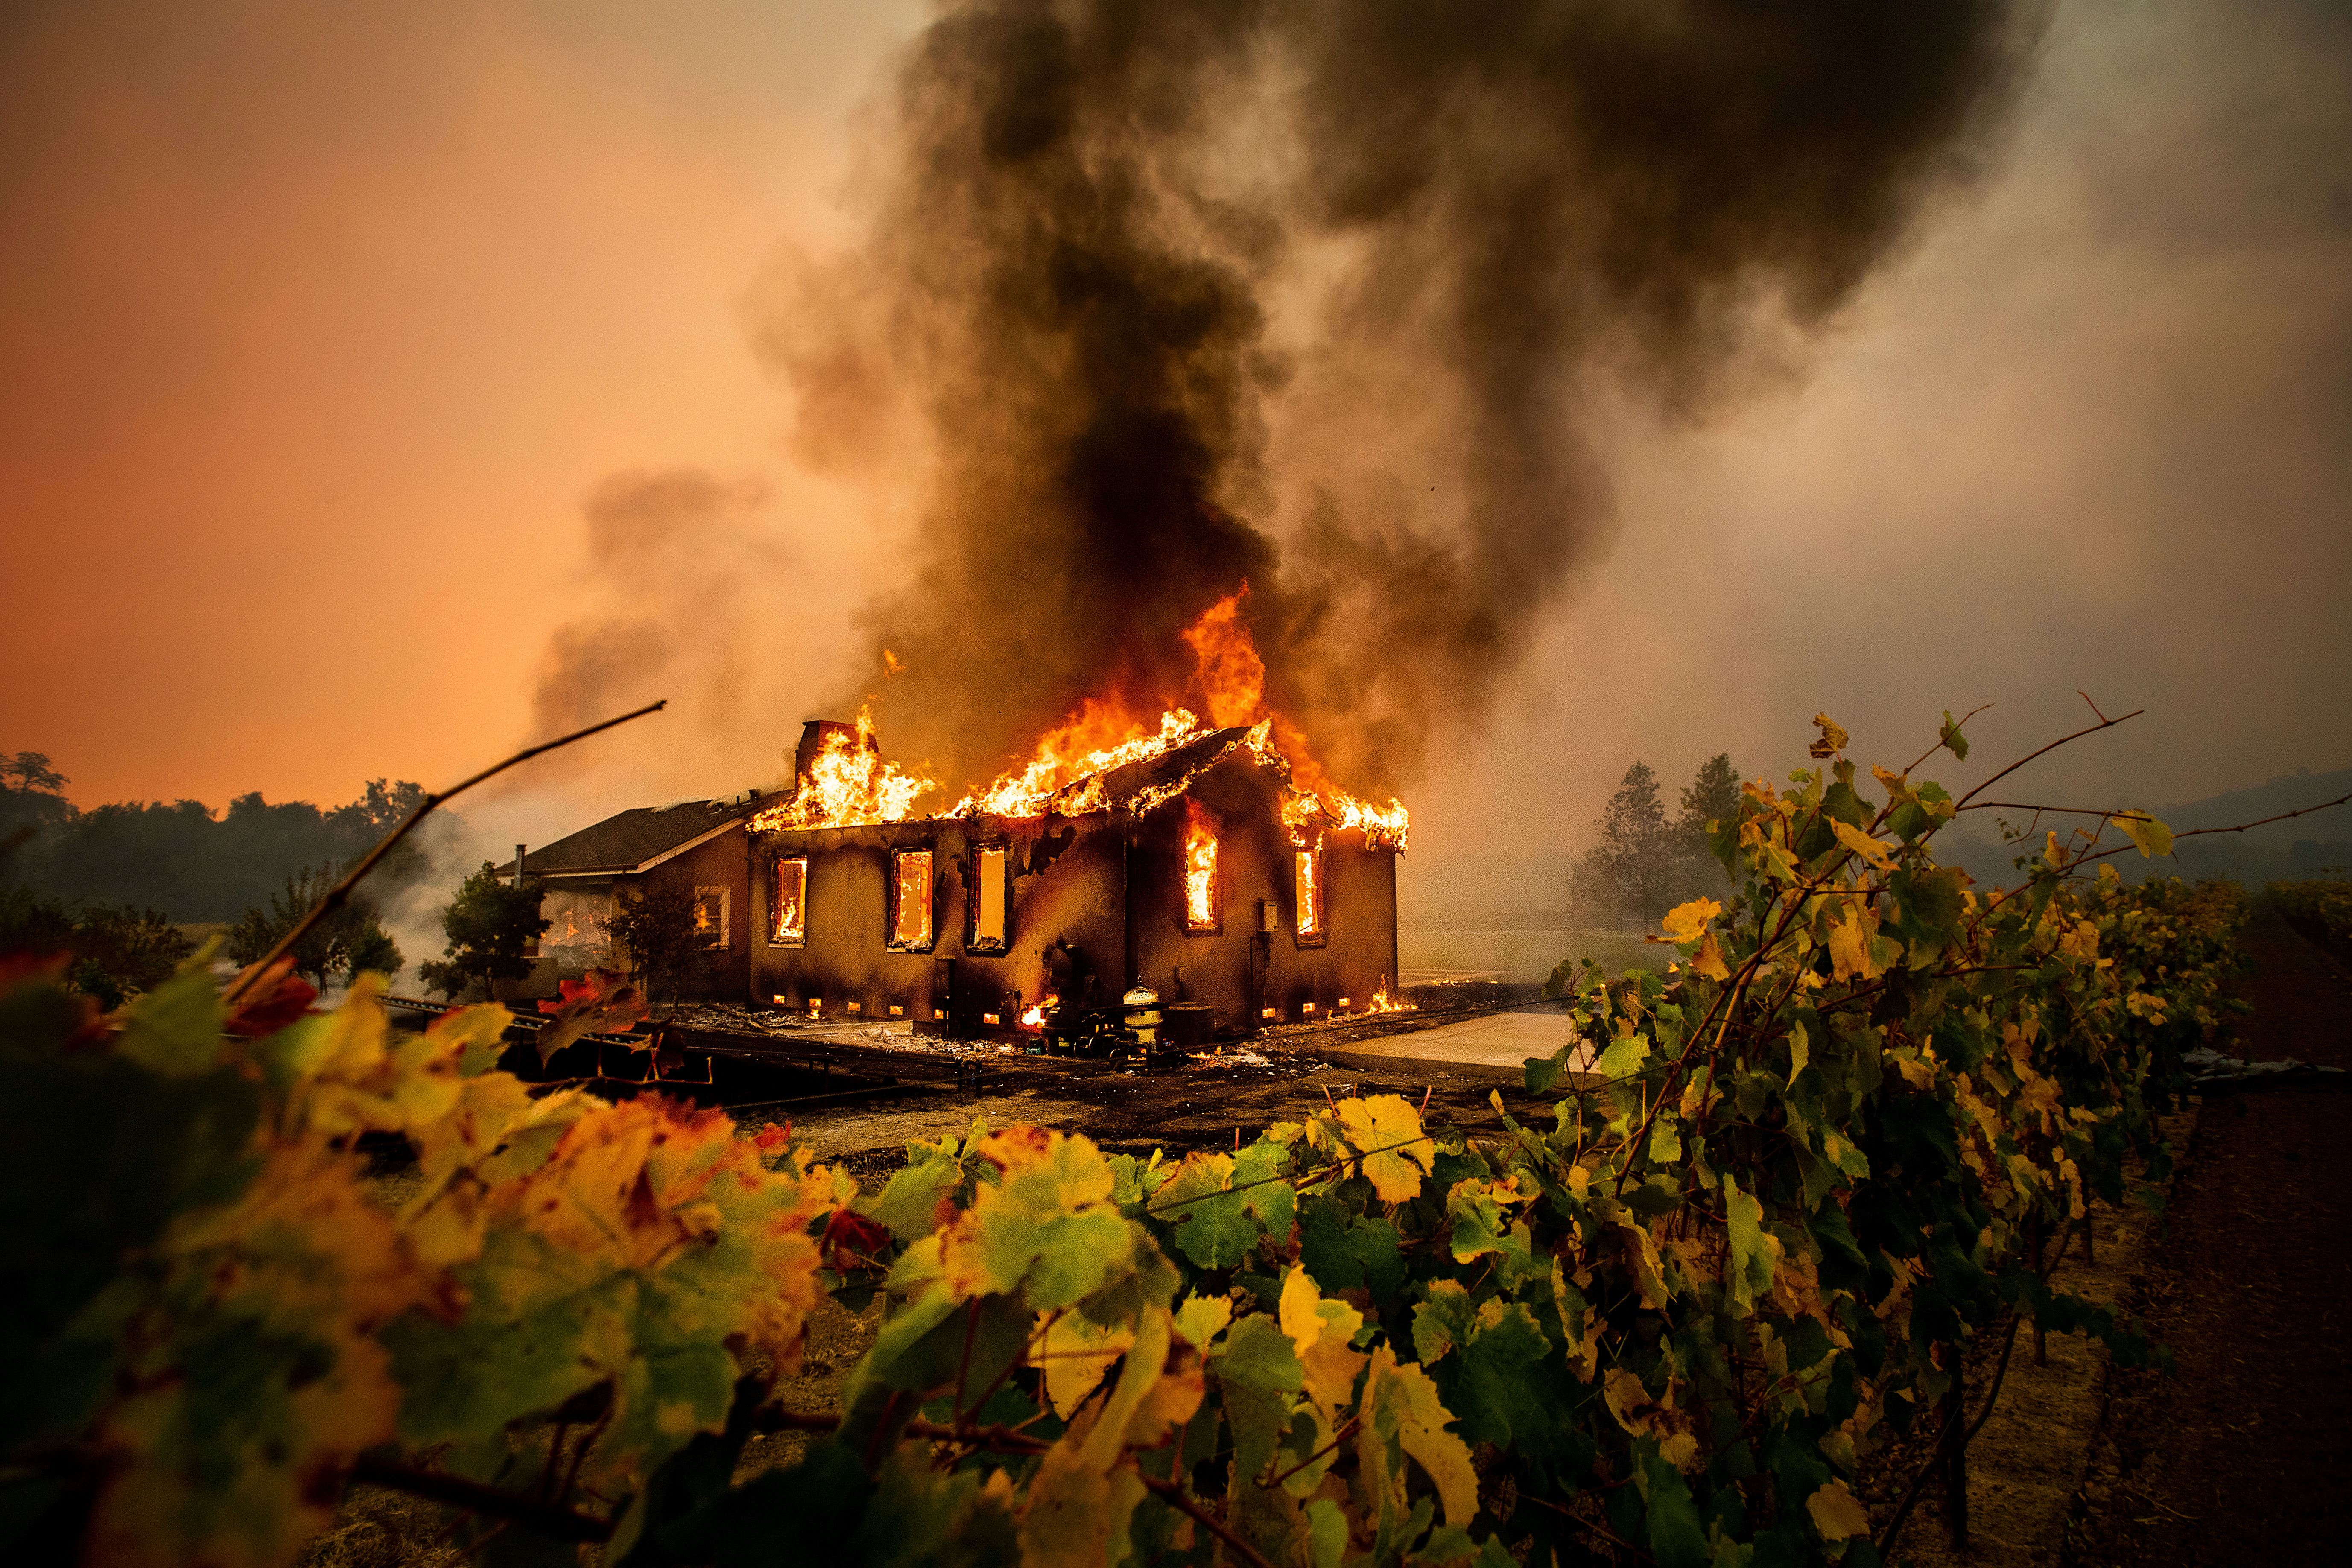 A plume of smoke rises from a burning house. A fence with green vines in the foreground.